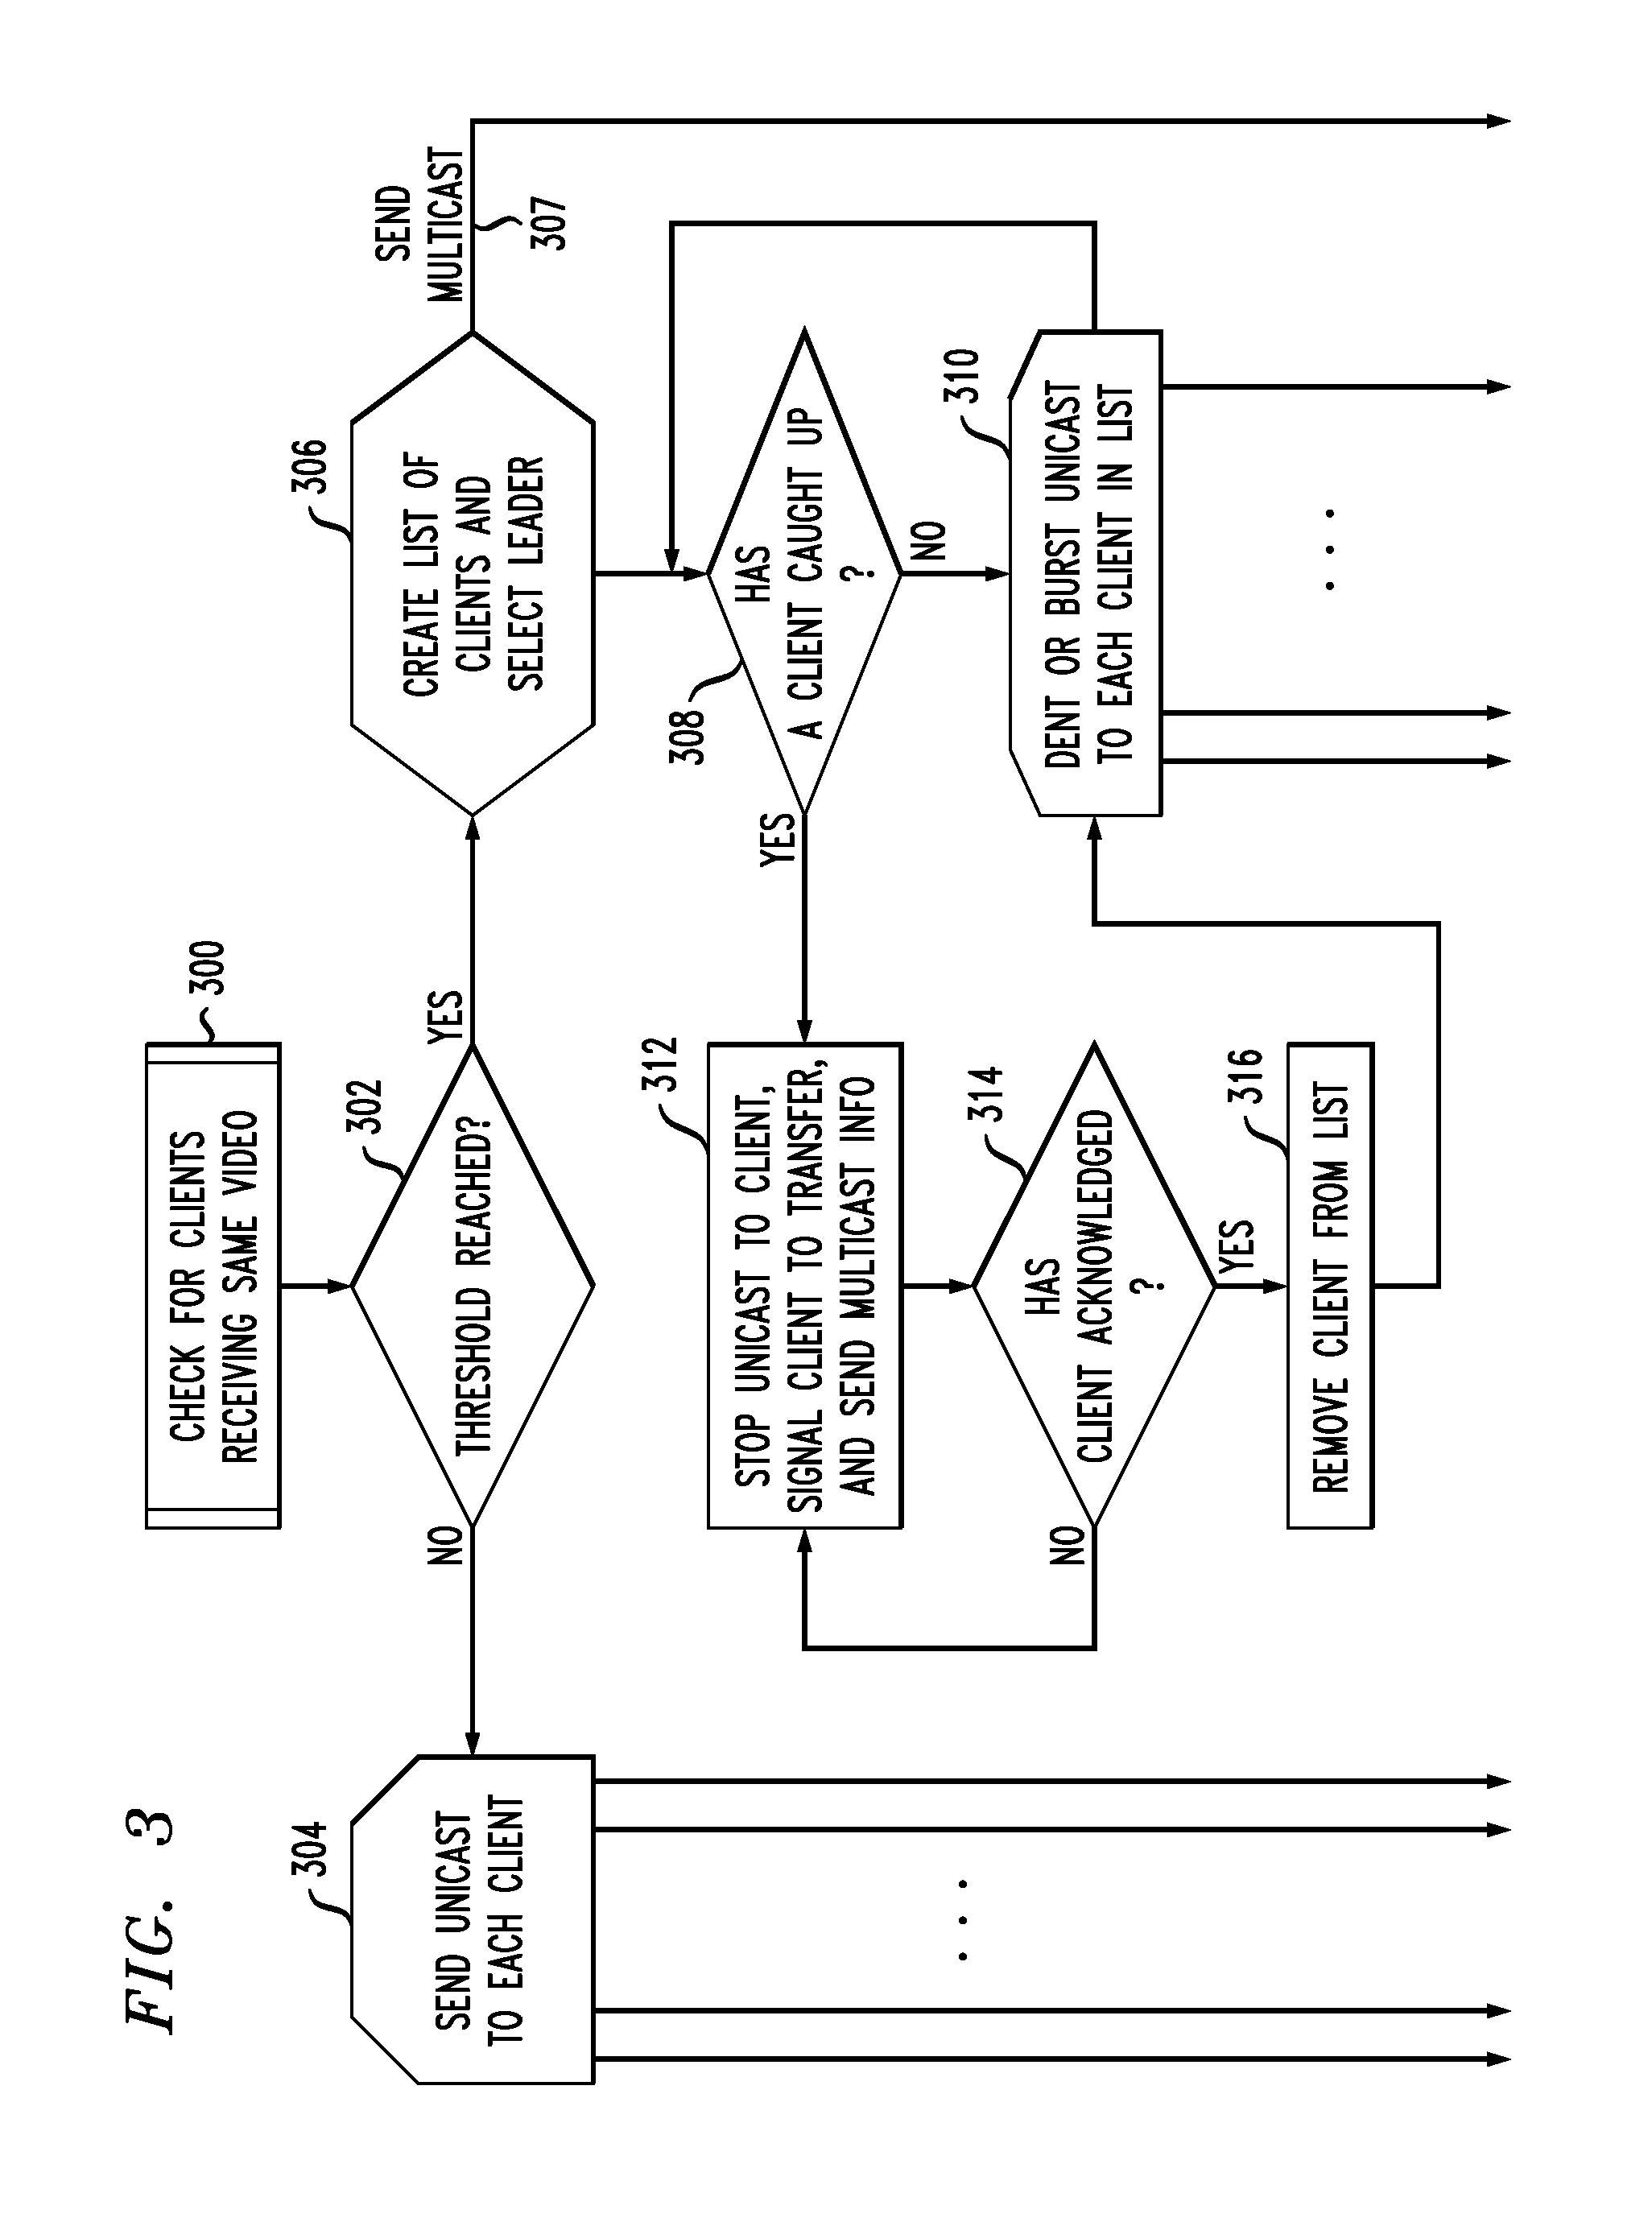 Controller Providing Gradual Transition of Multiple Terminals from Unicast Transmission